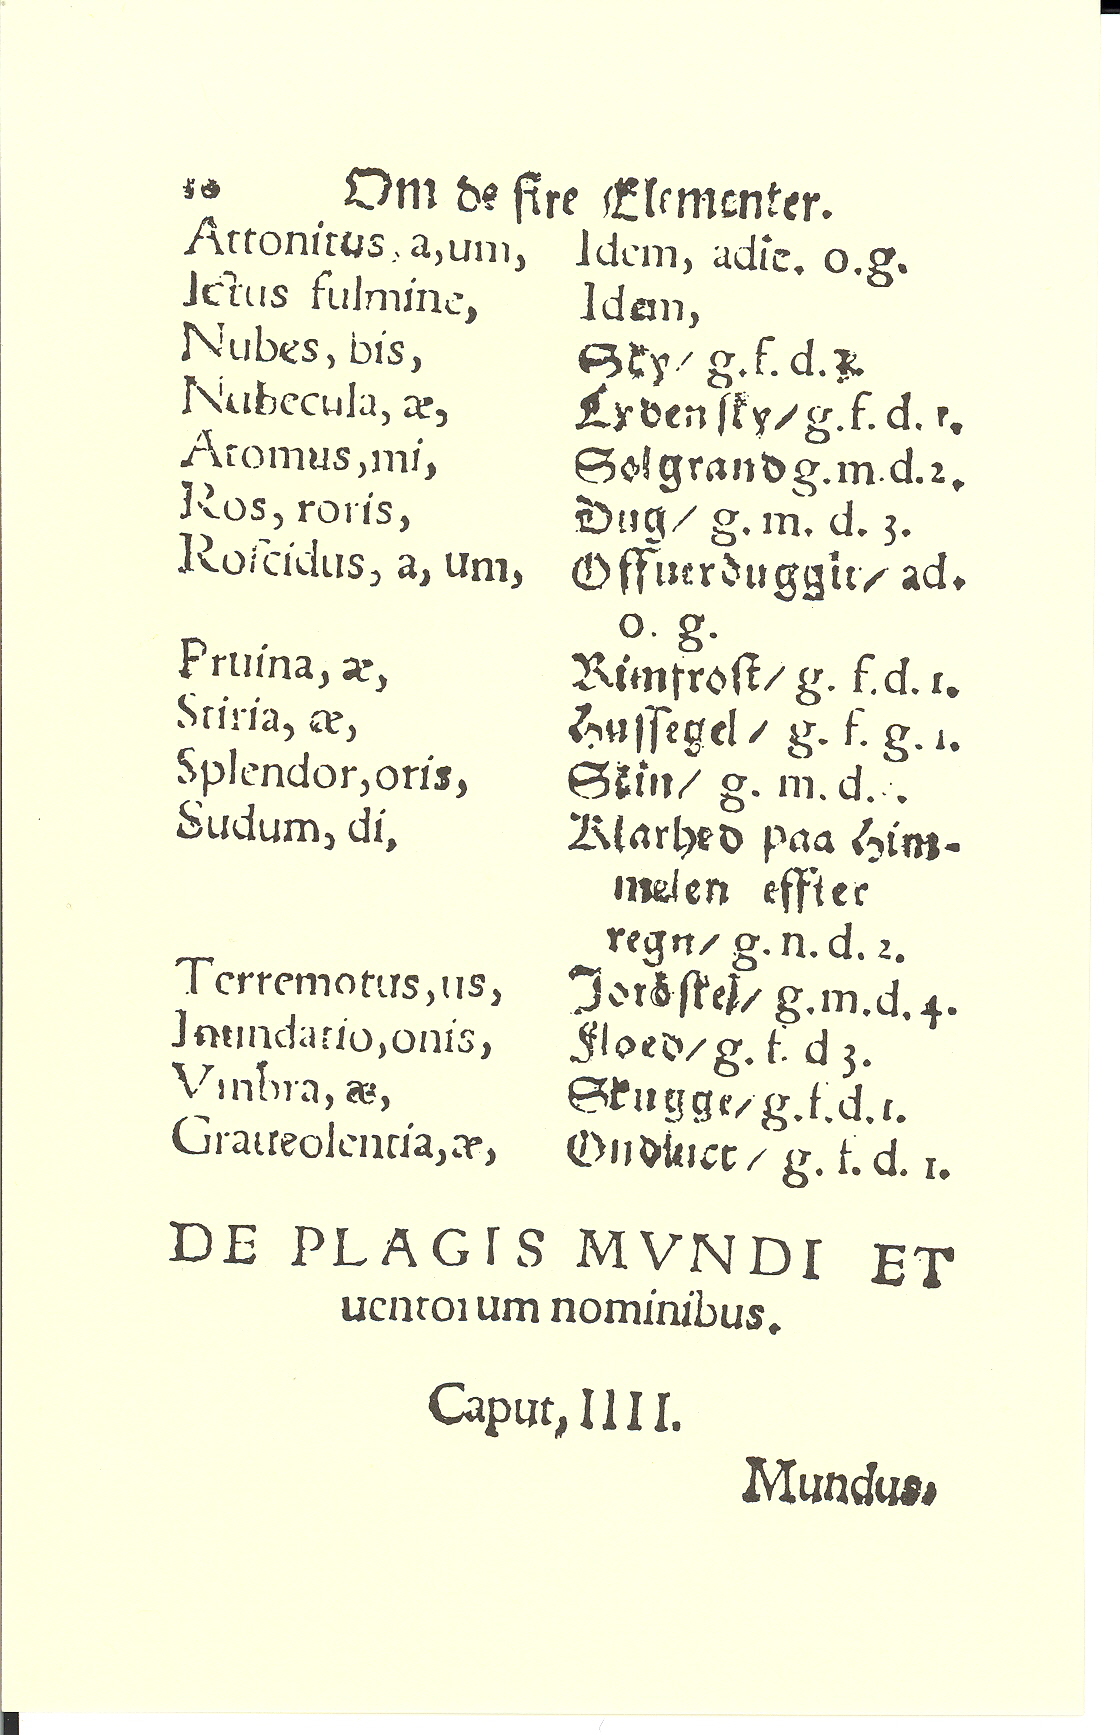 Smith 1563, Side: 10